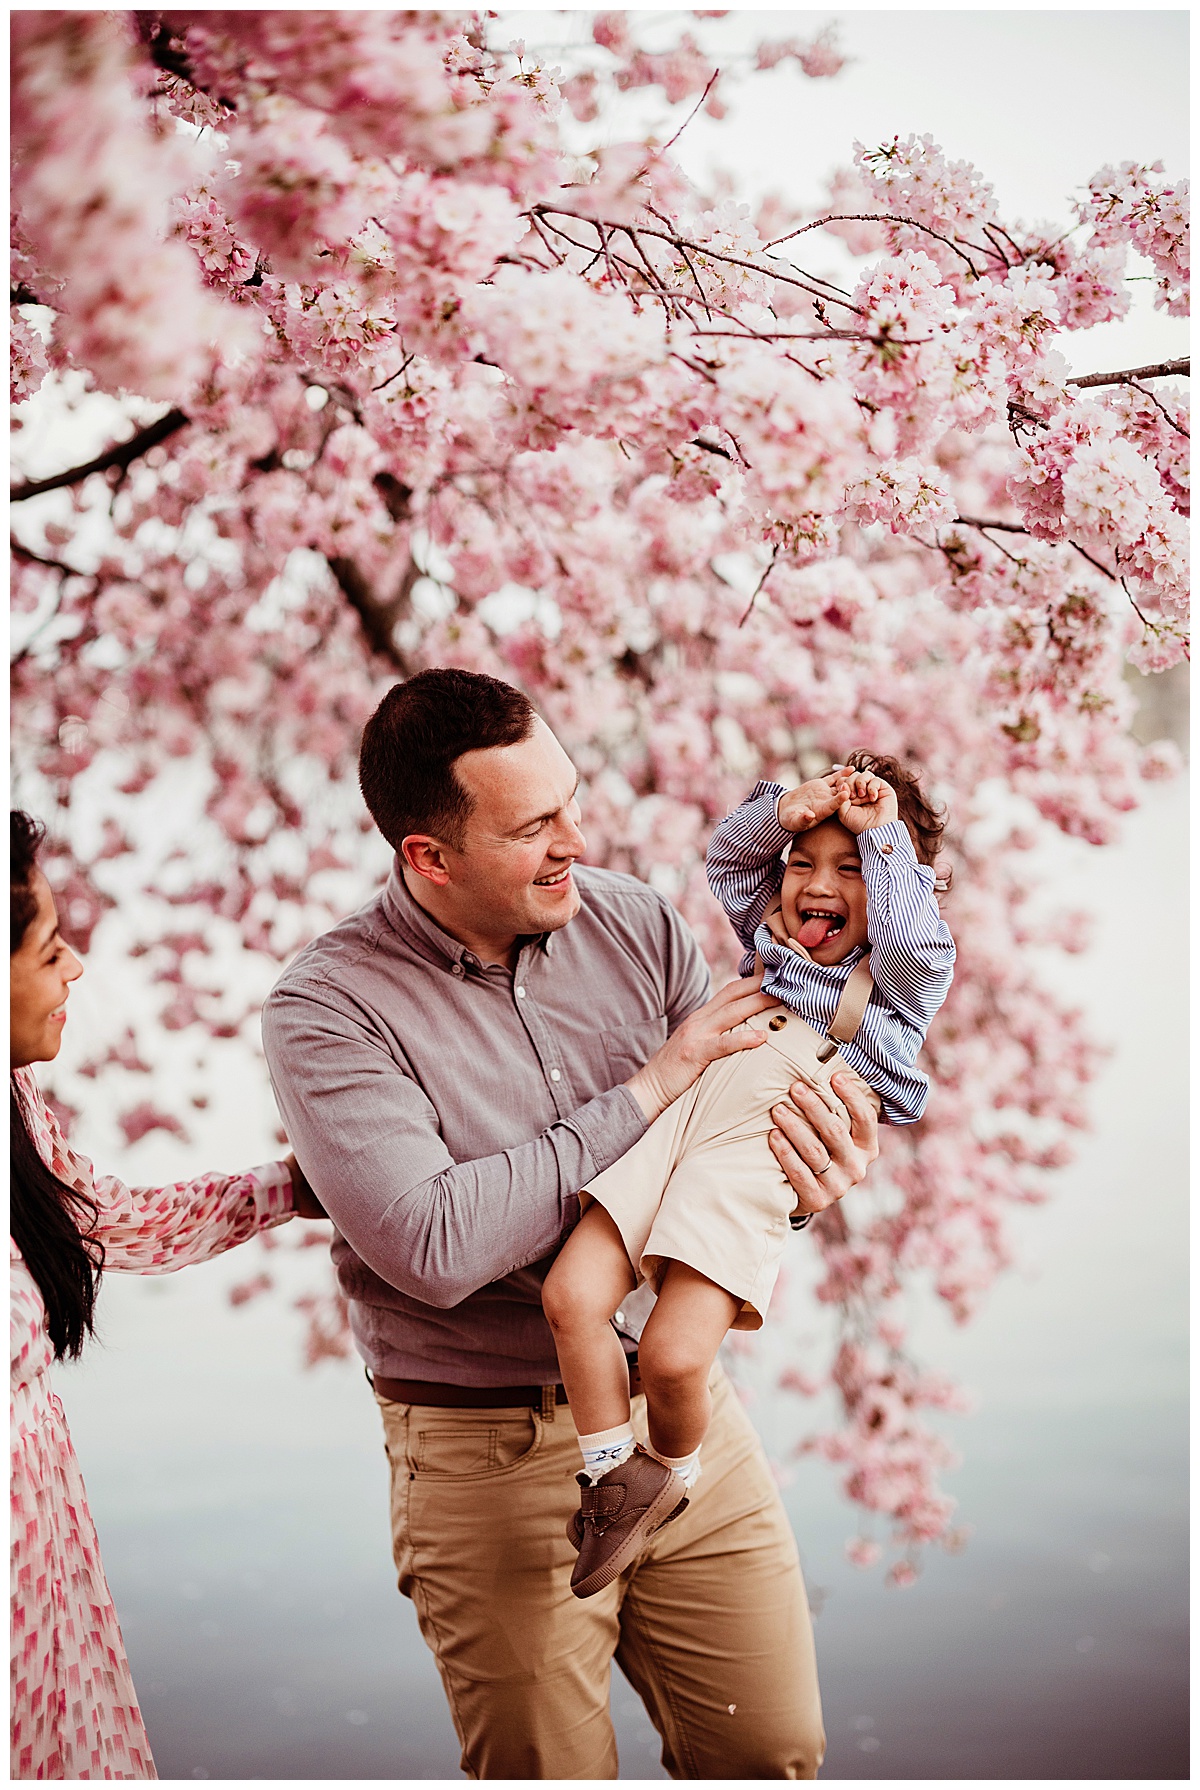 Parents play with their son under blooming Cherry Blossom tree for Norma Fayak Photography